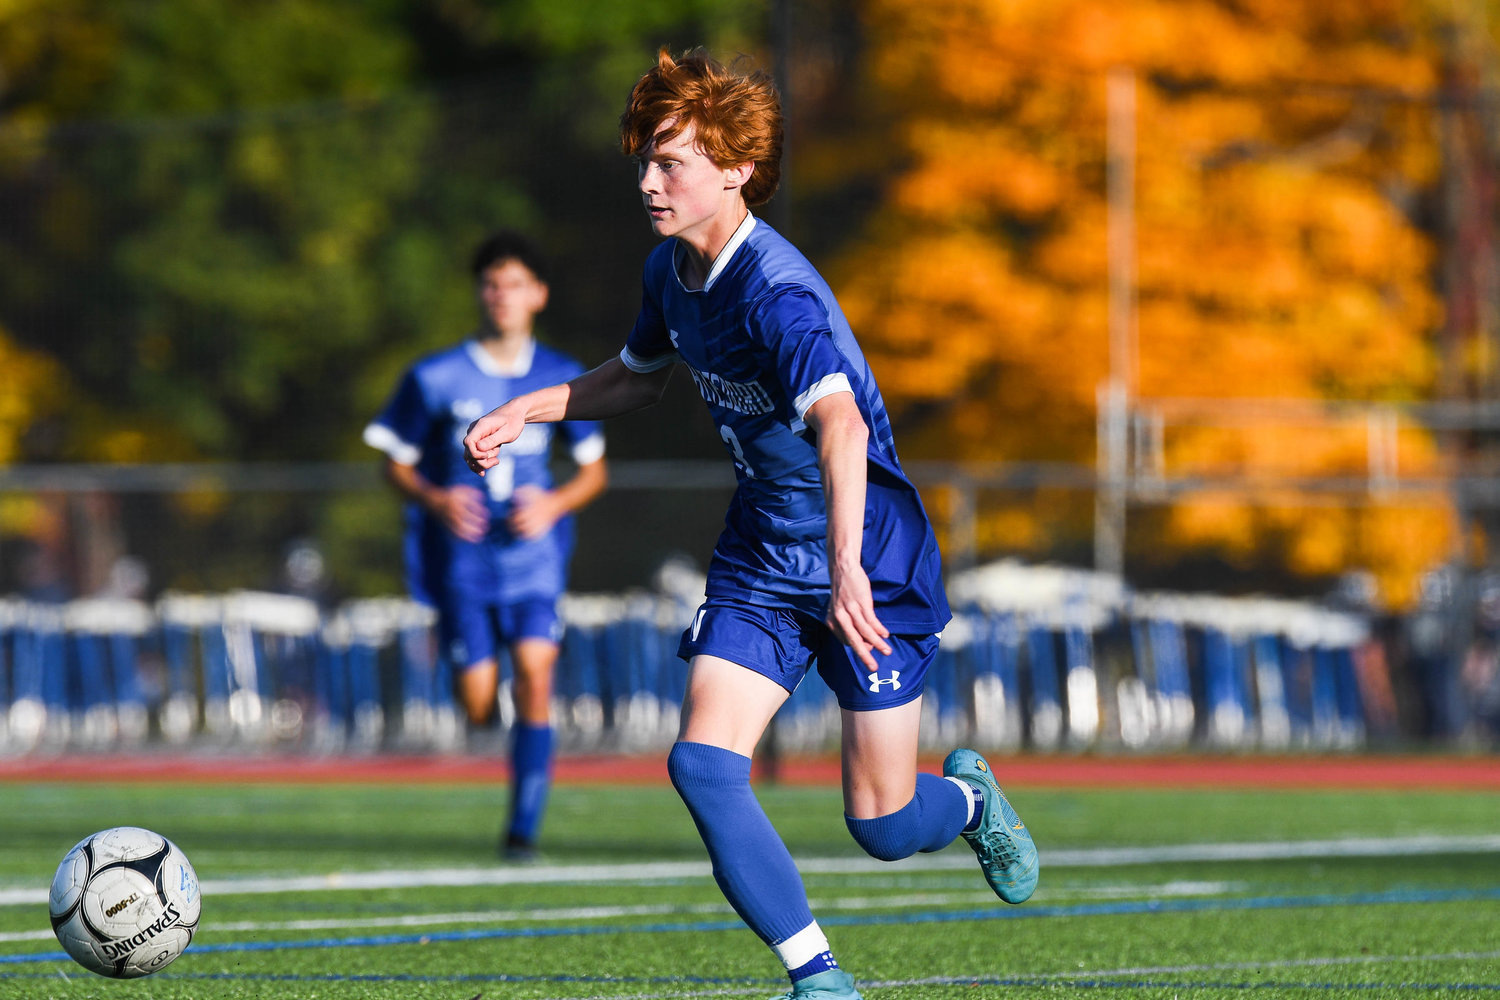 Whitesboro’s Joshua Gorgas moves the ball up the field during the game against Rome Free Academy on Monday, Oct. 11 in Whitesboro. Gorgas had the assist on the Warriors’ lone goal but the hosts lost 3-1.